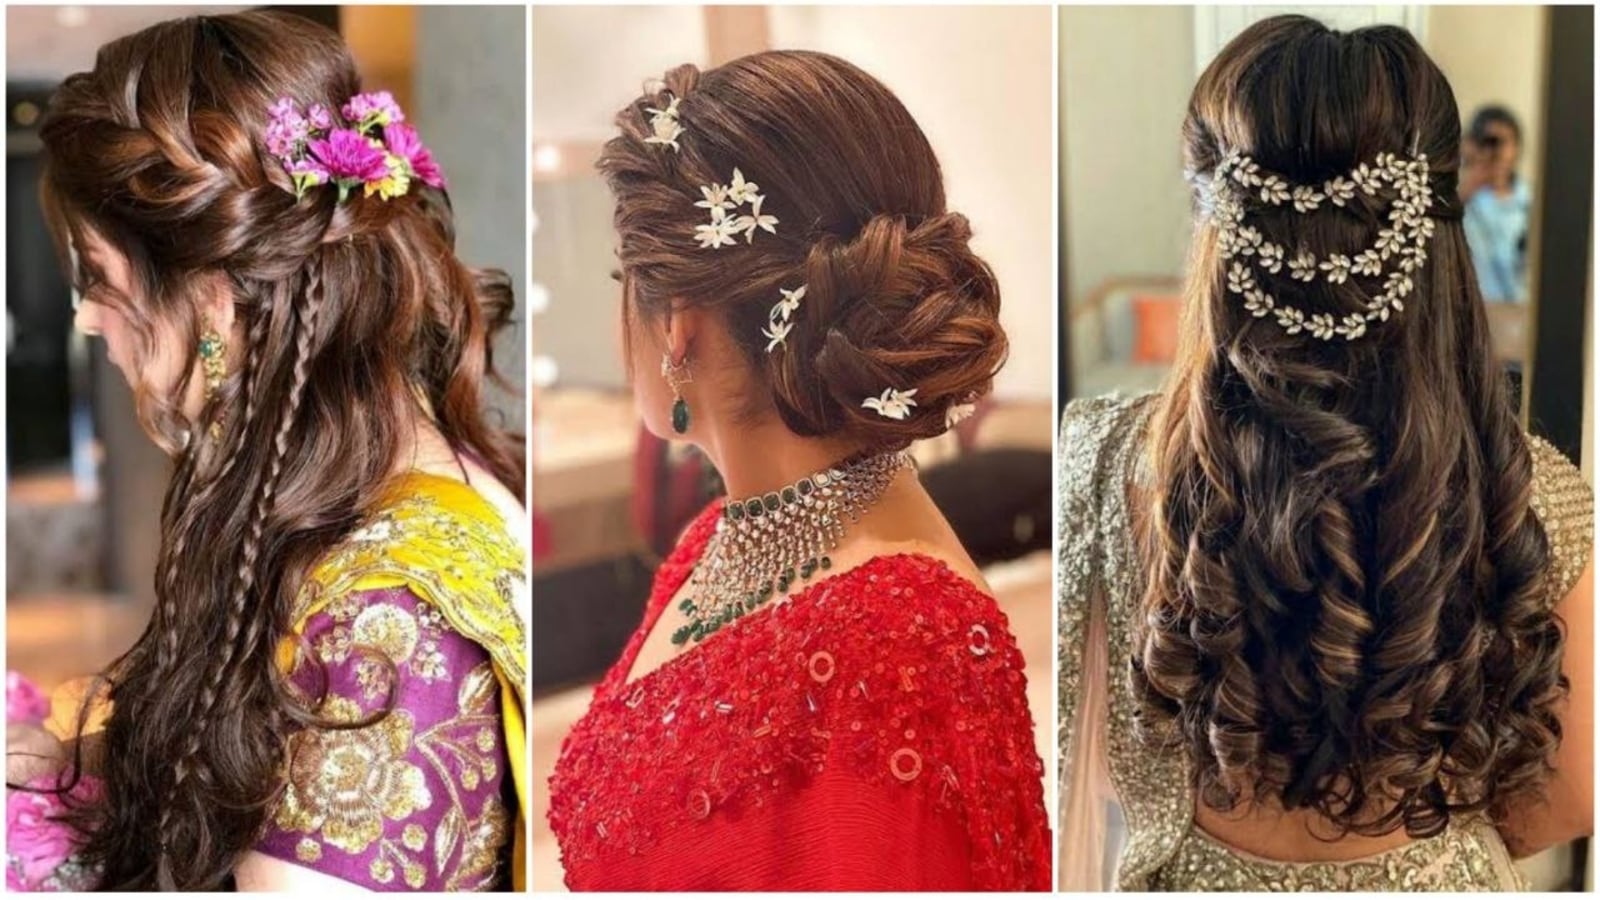 From bouncy curls to half updo Tips to get the iconic bridal hairstyles   Fashion Trends  Hindustan Times